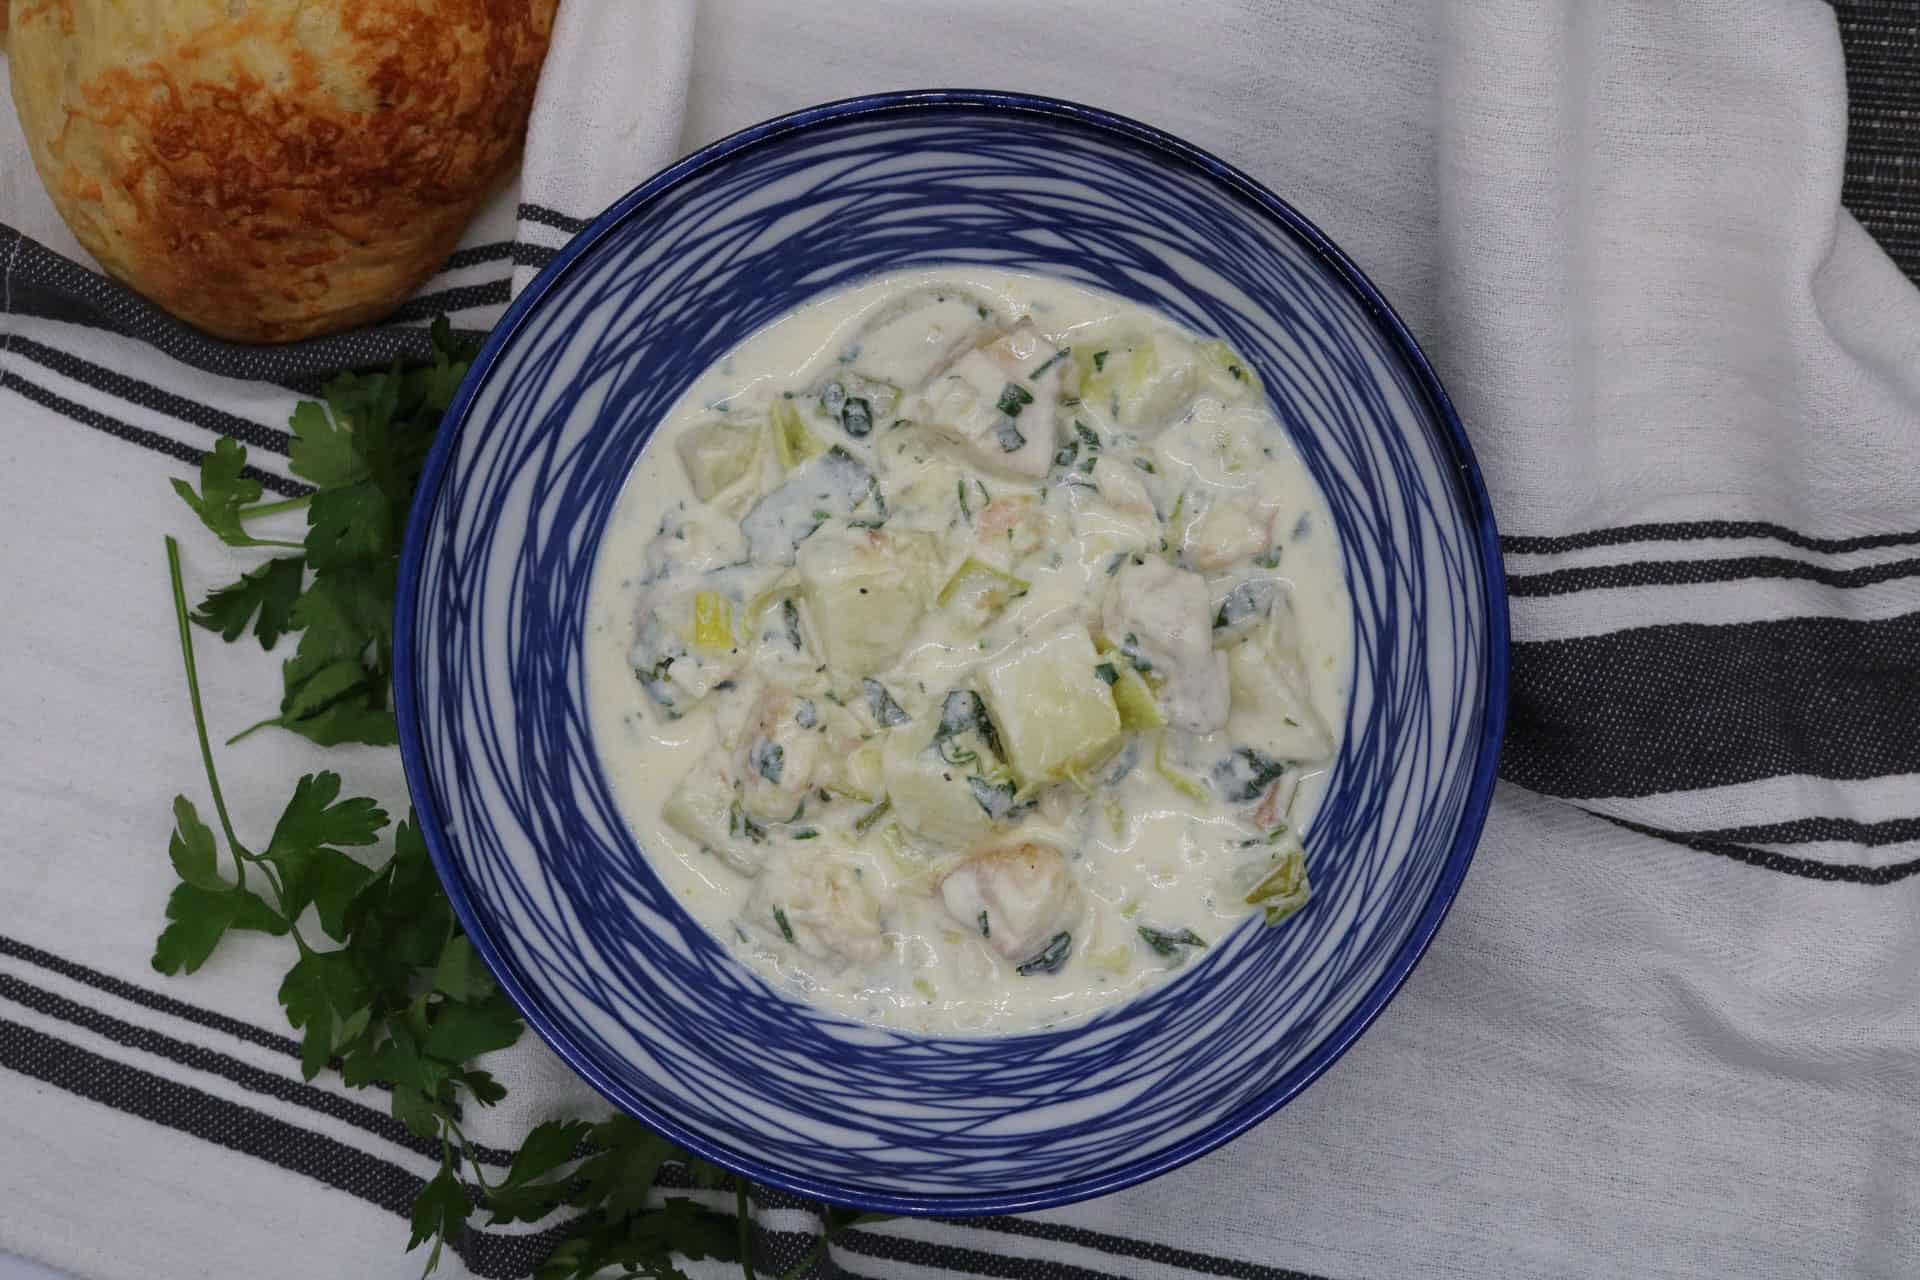 Portion of cullen skink in a blue and white bowl with bread on the side